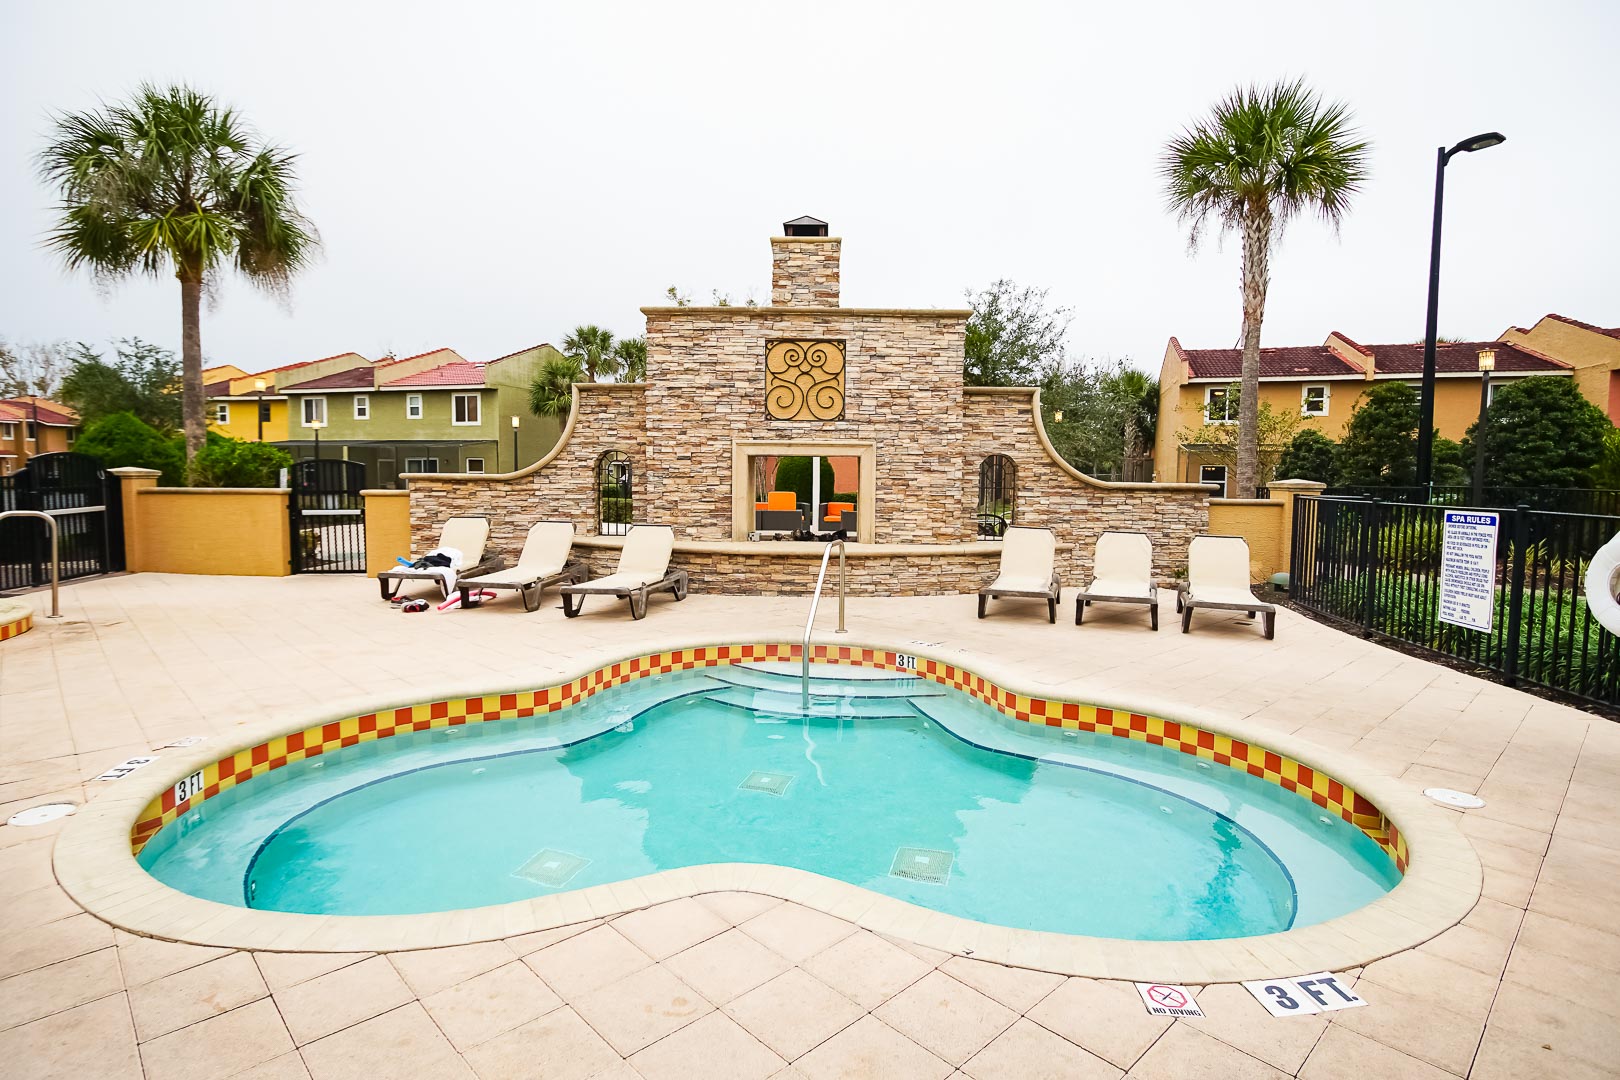 A relaxing outdoor jacuzzi at VRI's Fantasy World Resort in Florida.